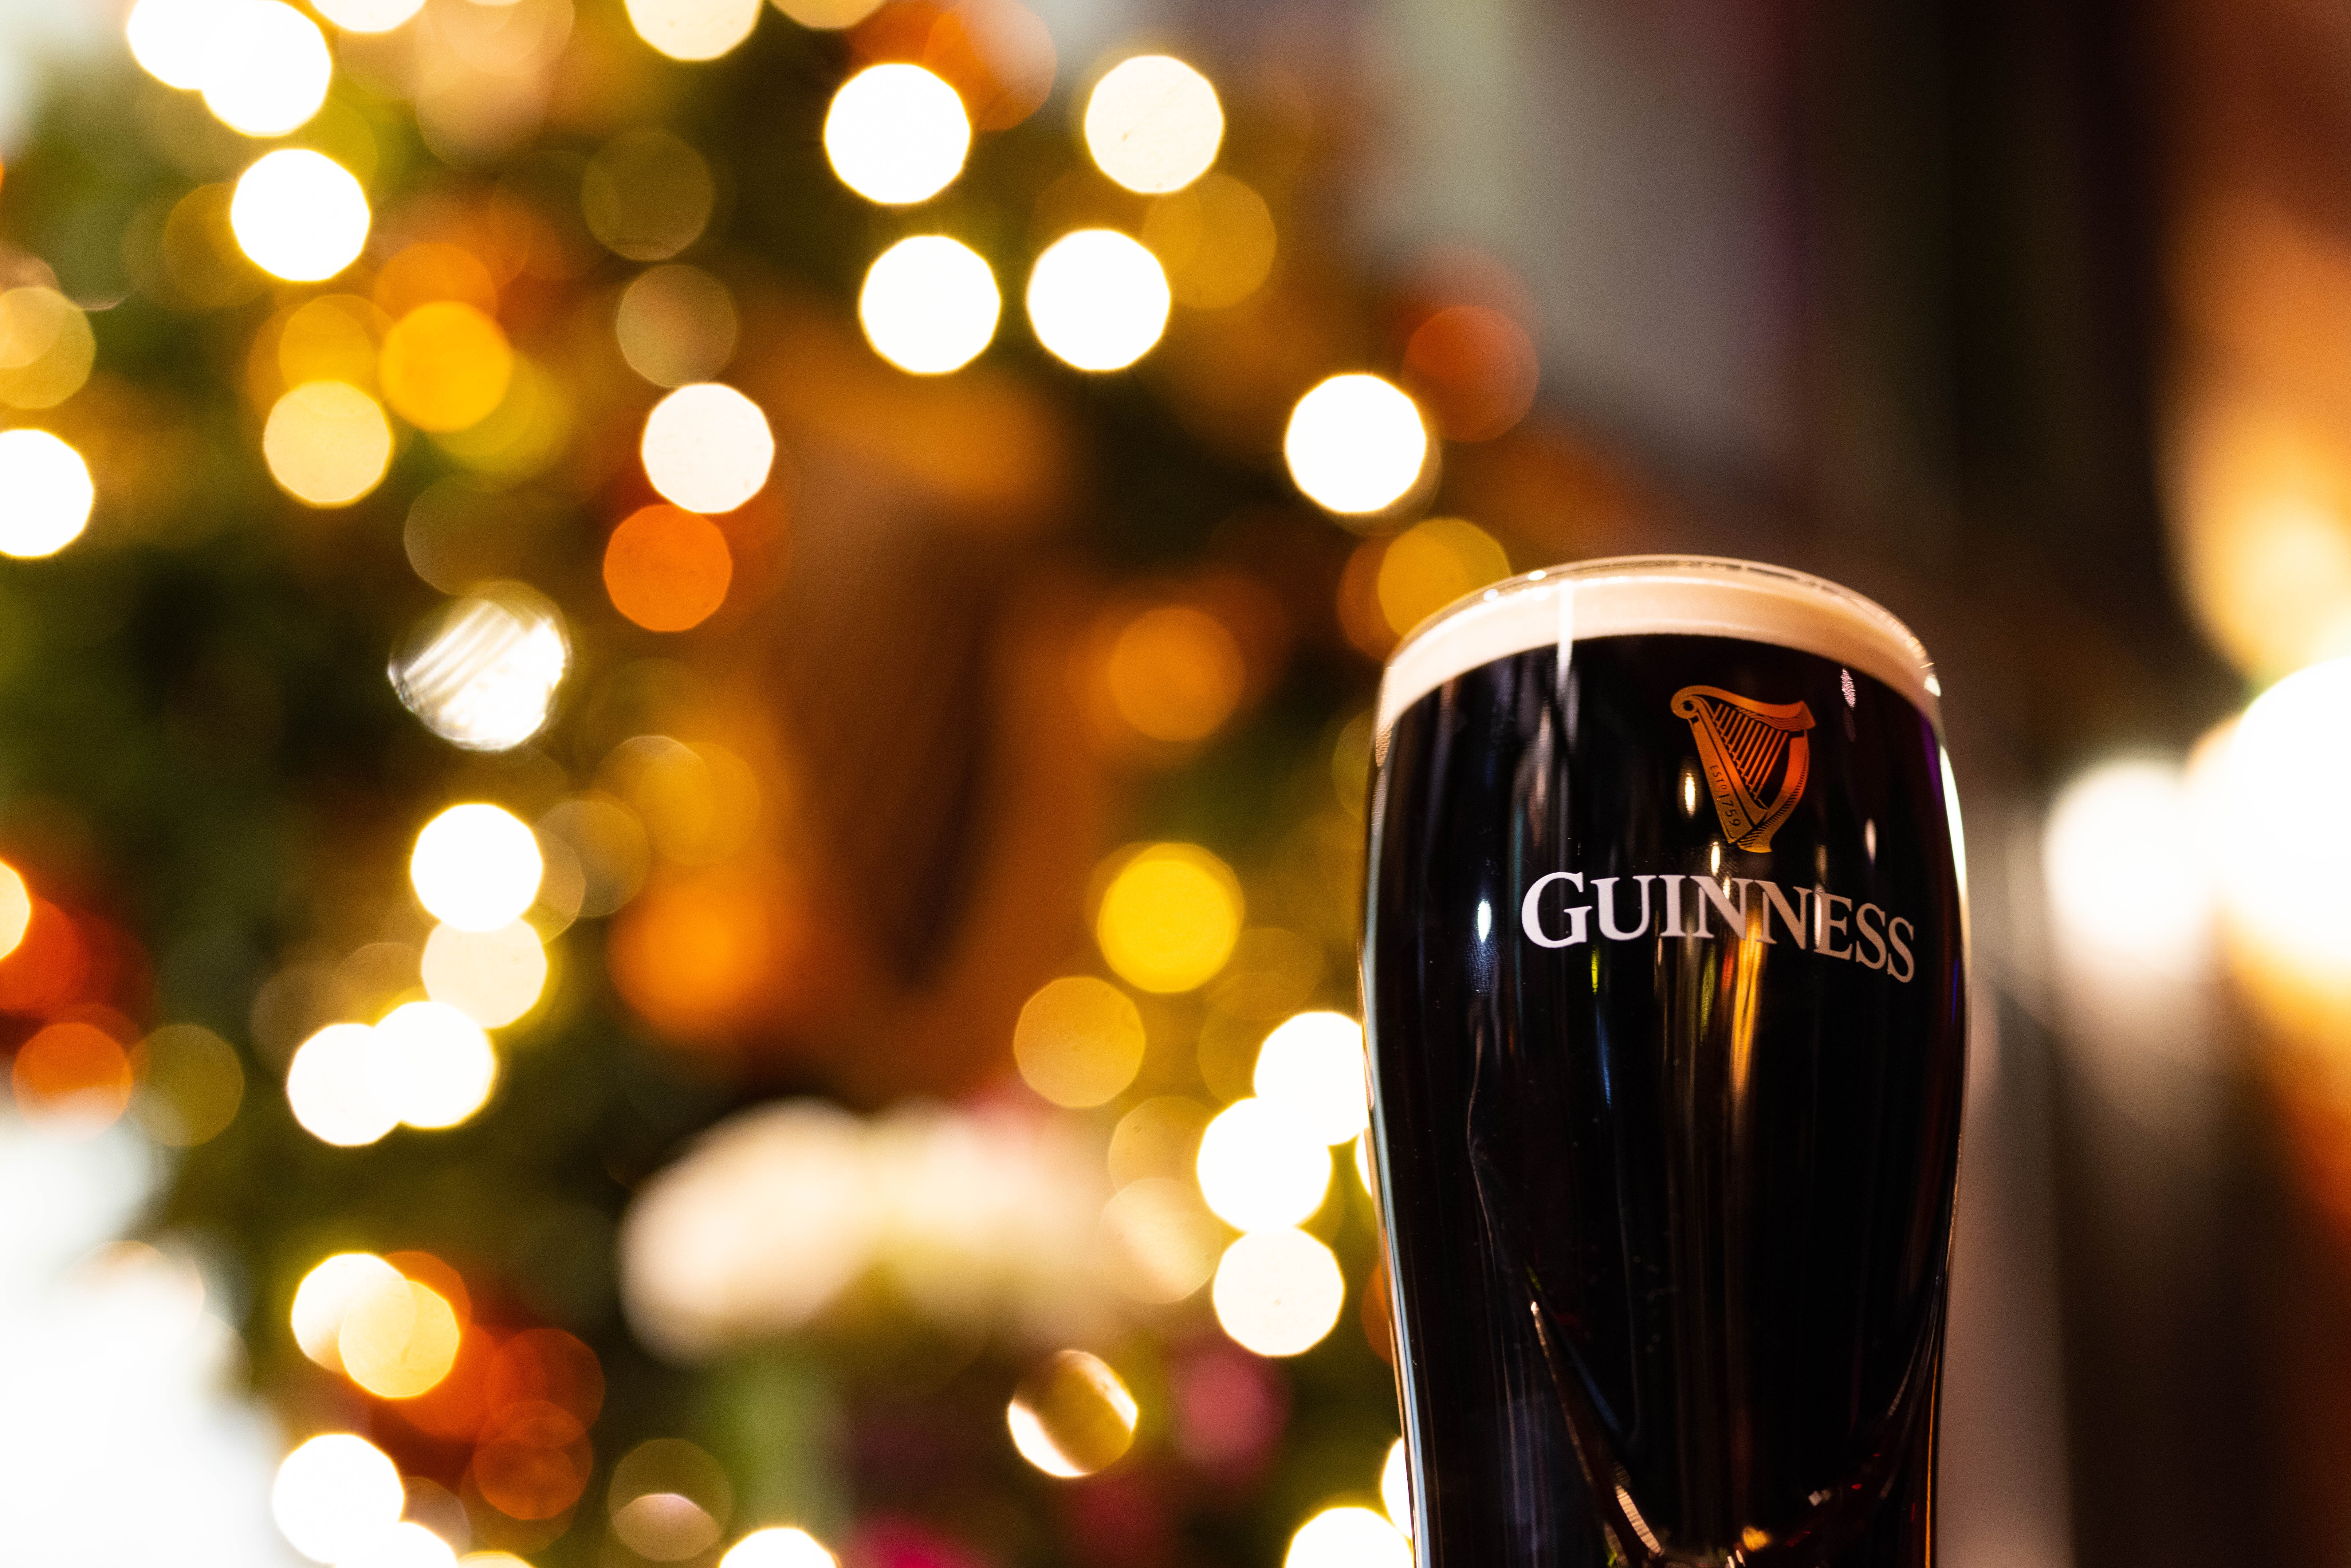 Guinness sales were particularly strong for Diageo (David Parry/PA)